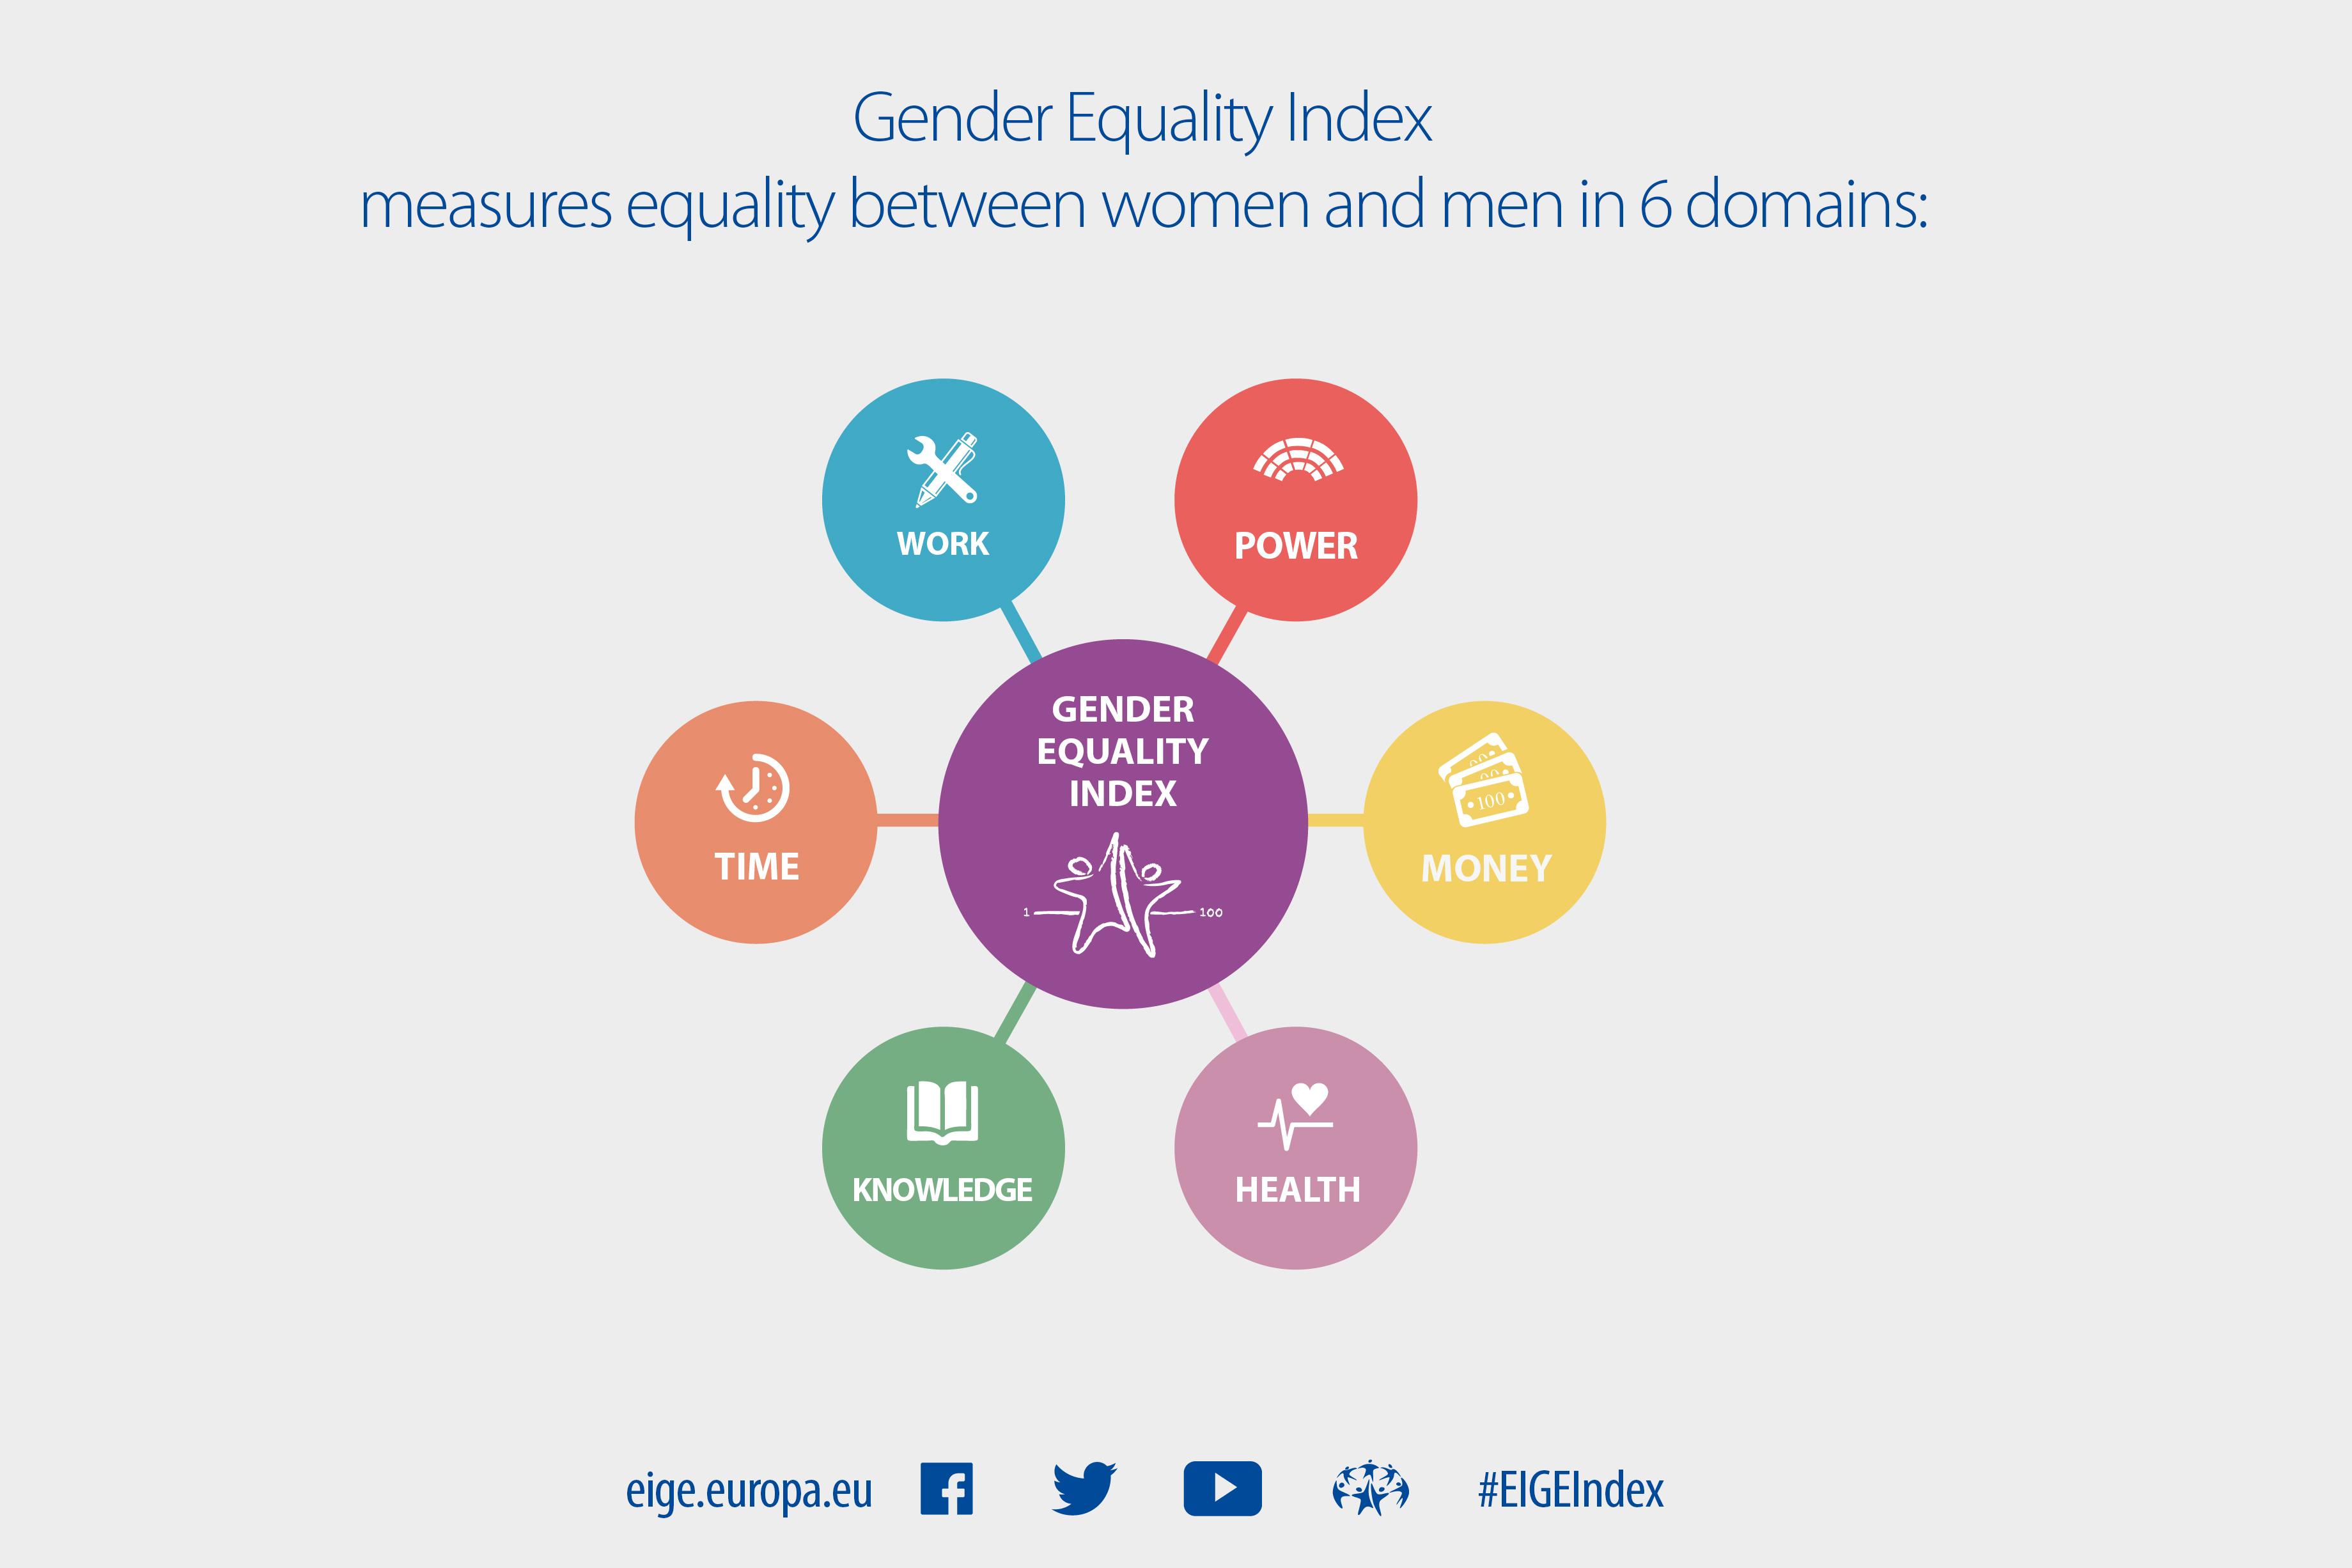 Recommendations for Promoting Gender Equality in Running Events